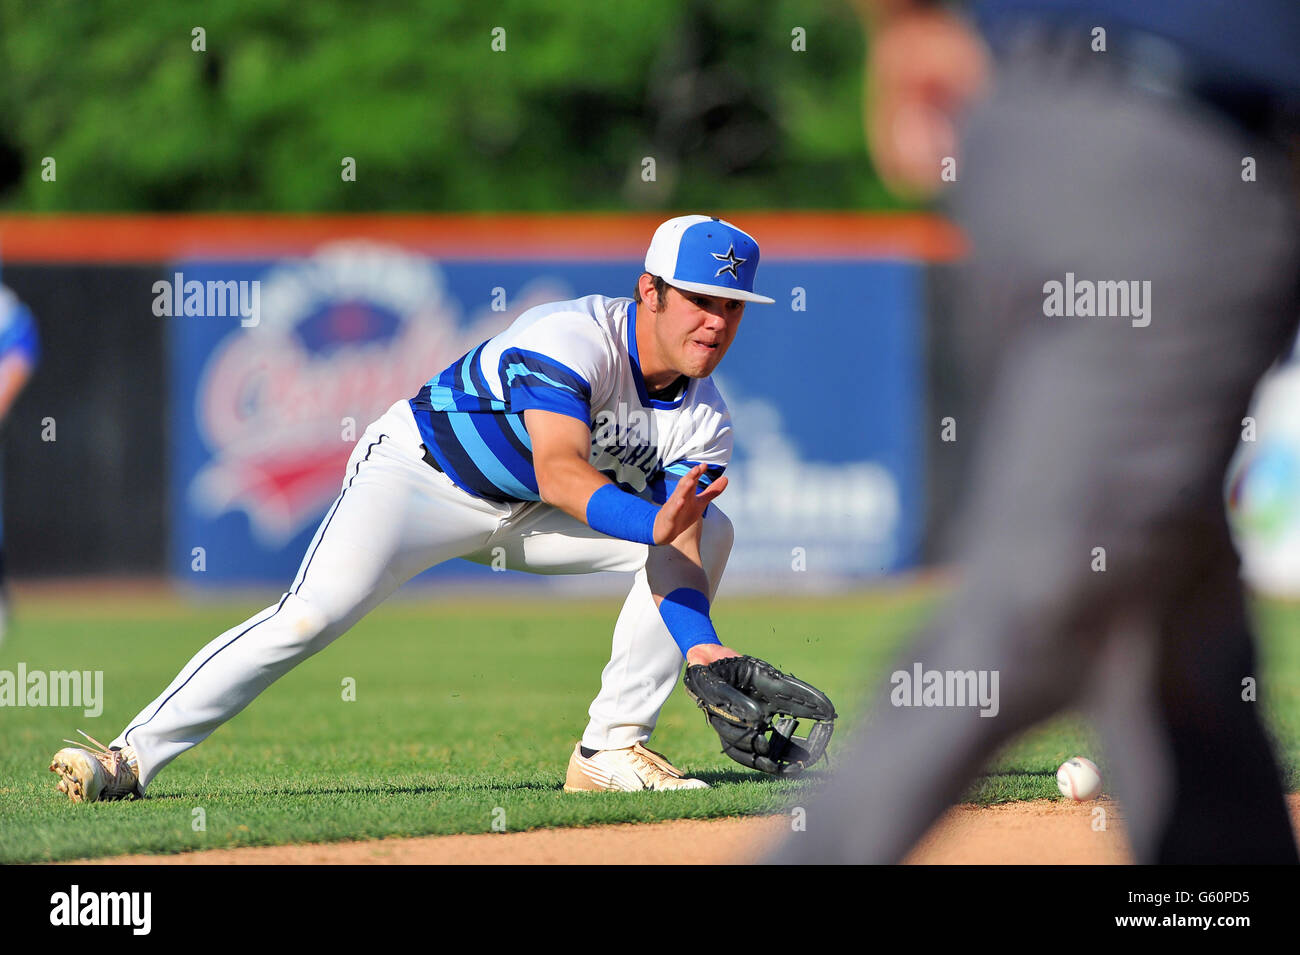 High school shortstop fielding a ground ball on the outfield grass before throwing to first base. USA. Stock Photo